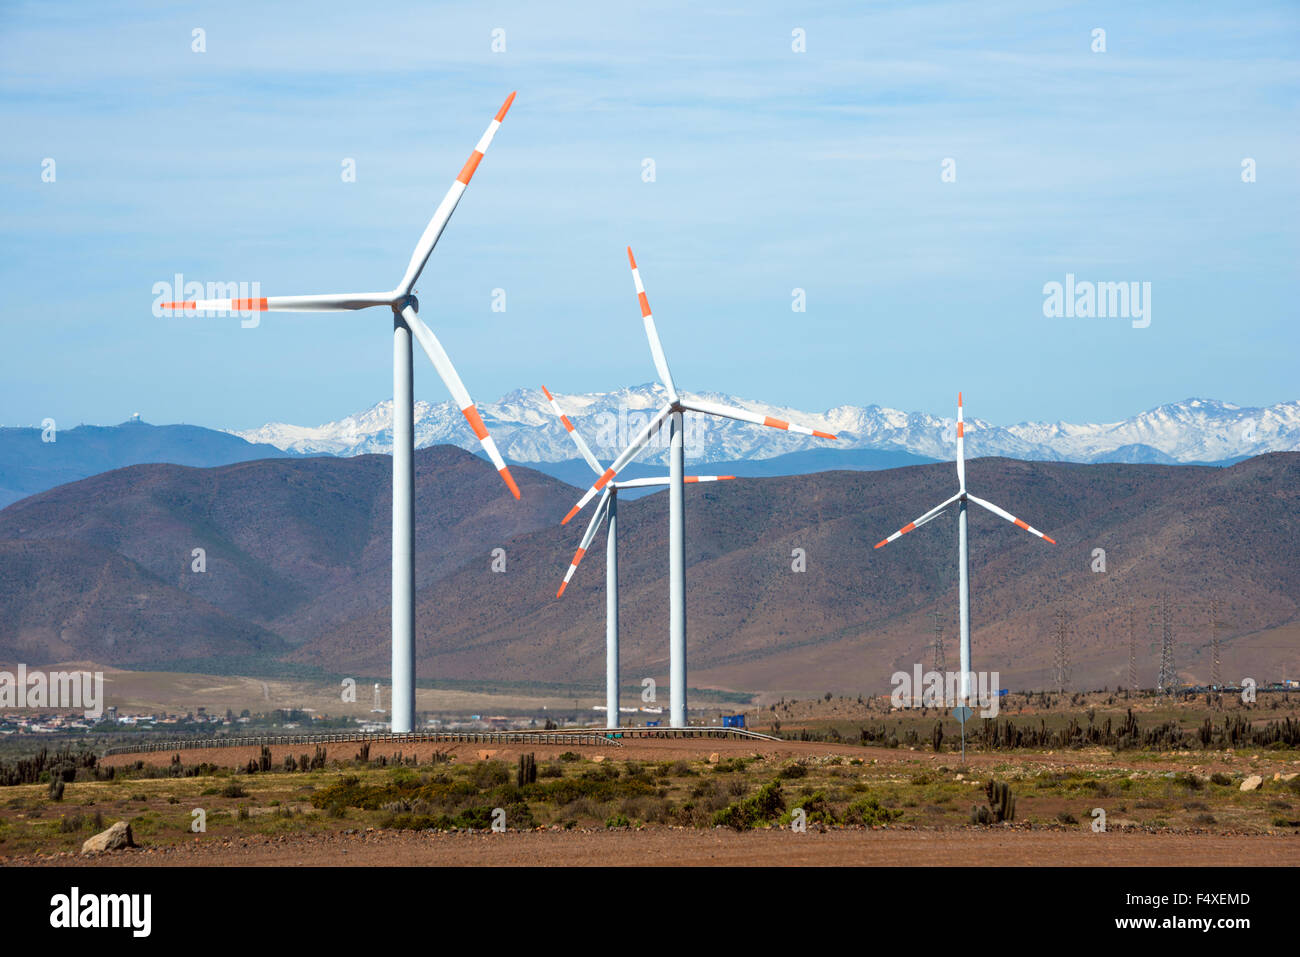 Wind farm (Spanish: parque eolico) in the mining regions of Atacama and Coquimbo, northern Chile Stock Photo